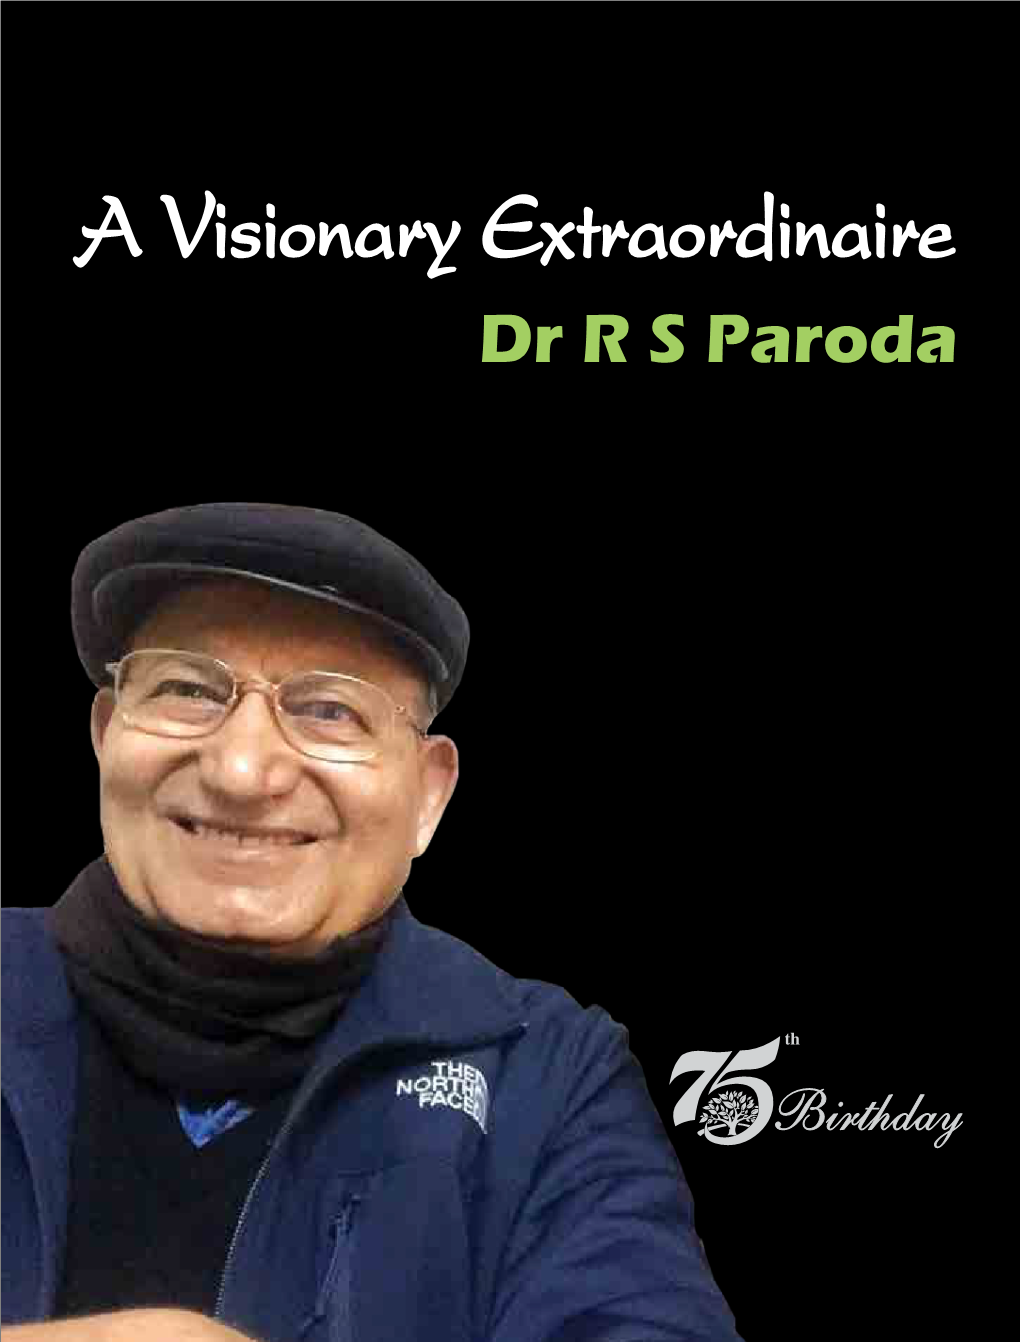 Commemorative Book on 75Th Birthday Dr Paroda Has Been Conferred Honorary D.Sc